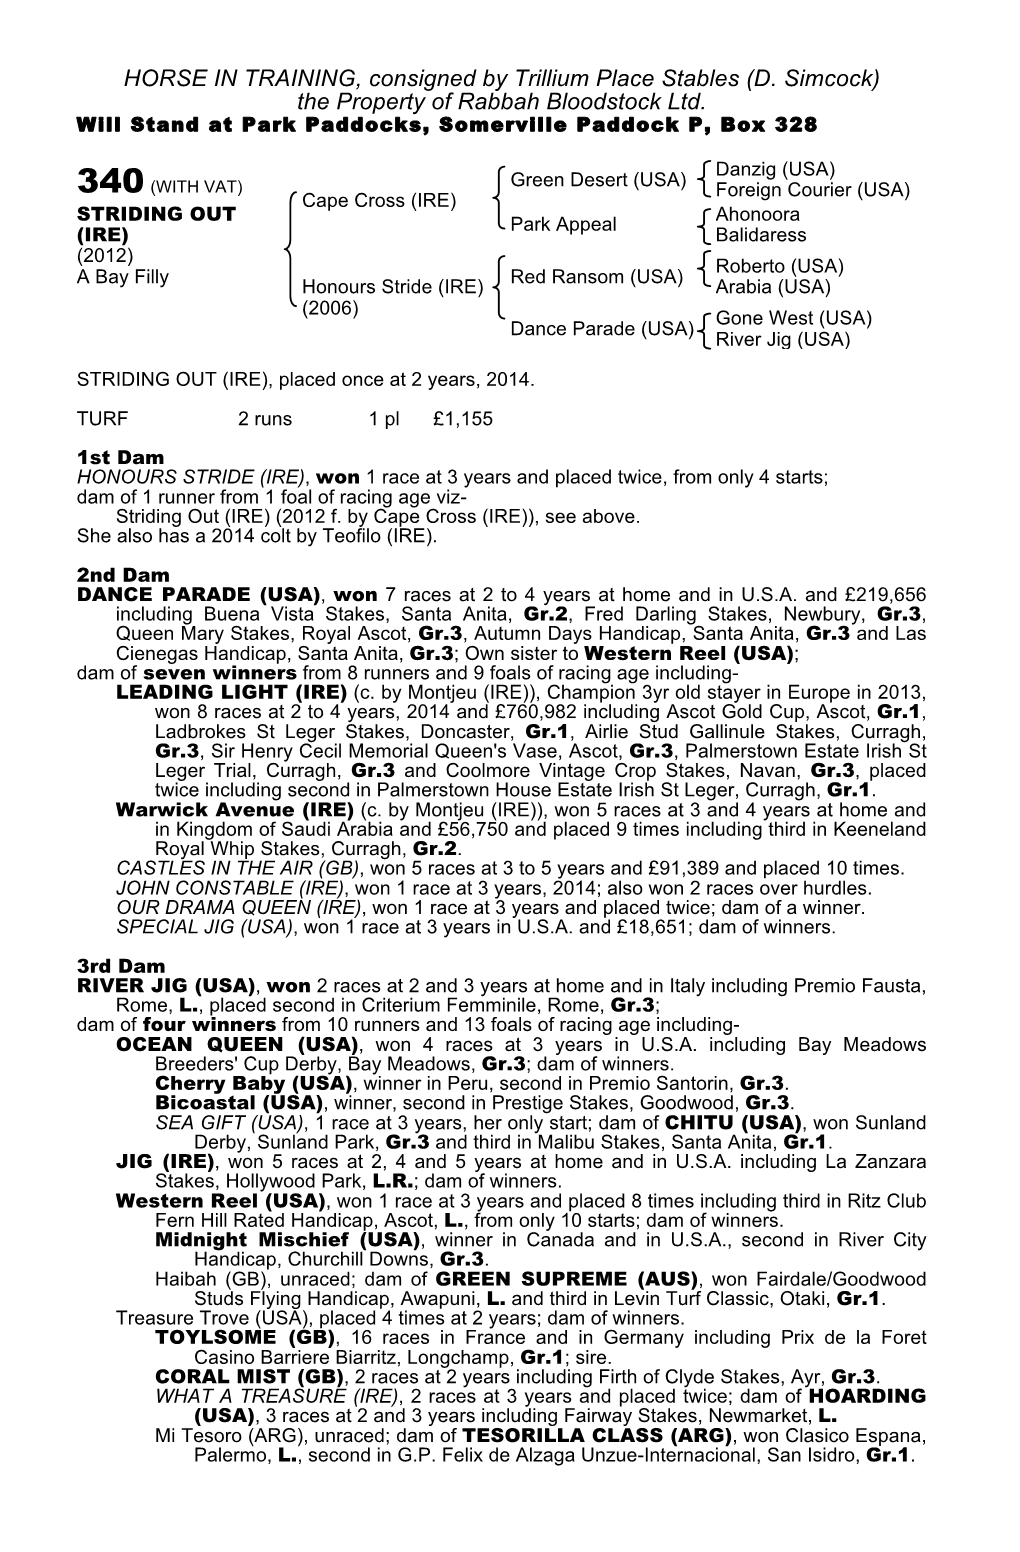 HORSE in TRAINING, Consigned by Trillium Place Stables (D. Simcock) the Property of Rabbah Bloodstock Ltd